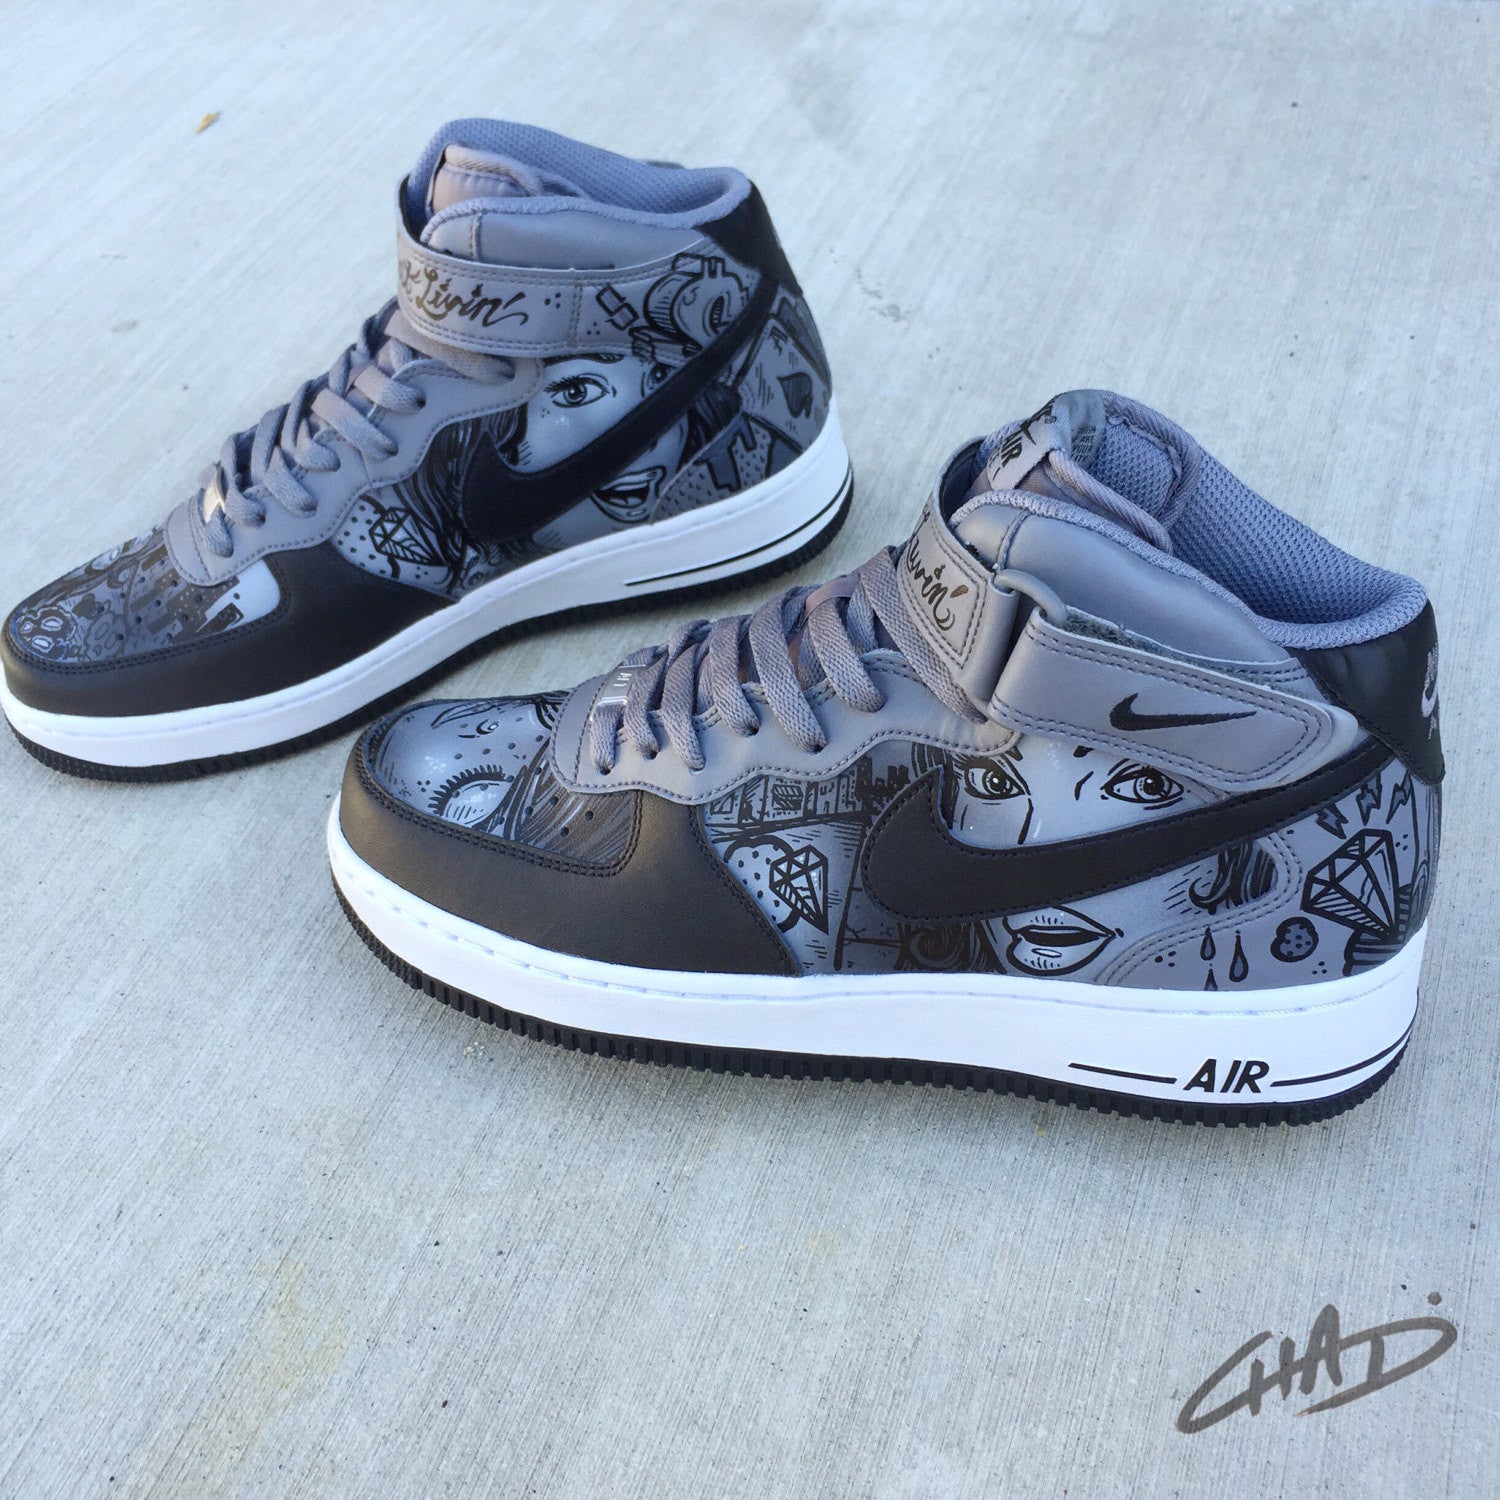 Dimes -  Custom hand painted Nike Air Force 1 shoes